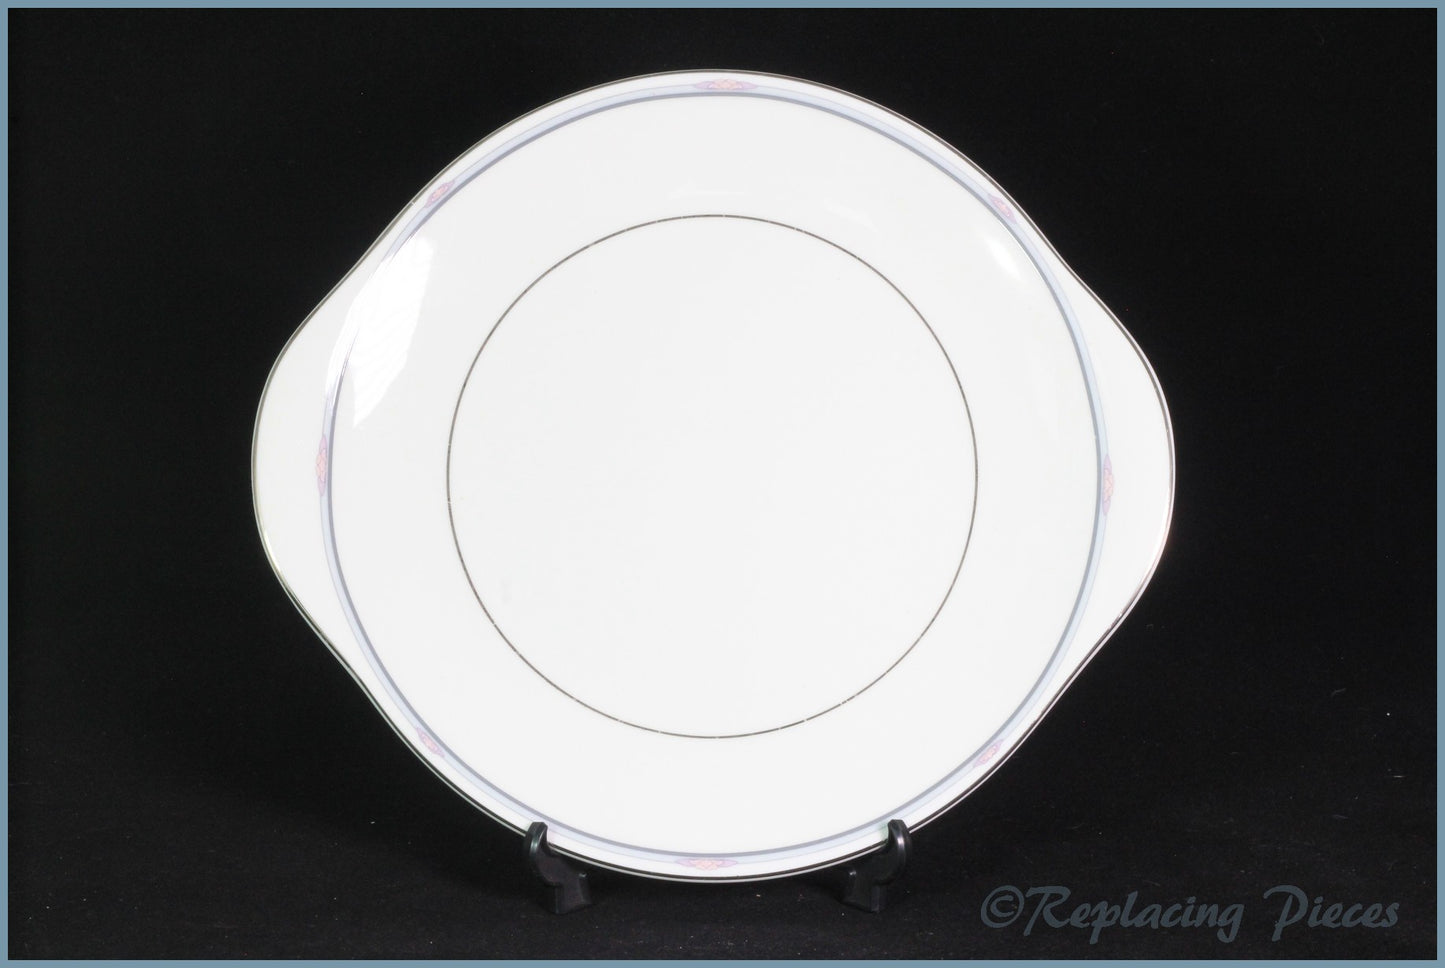 Royal Doulton - Simplicity (H5112) - Bread & Butter Serving Plate